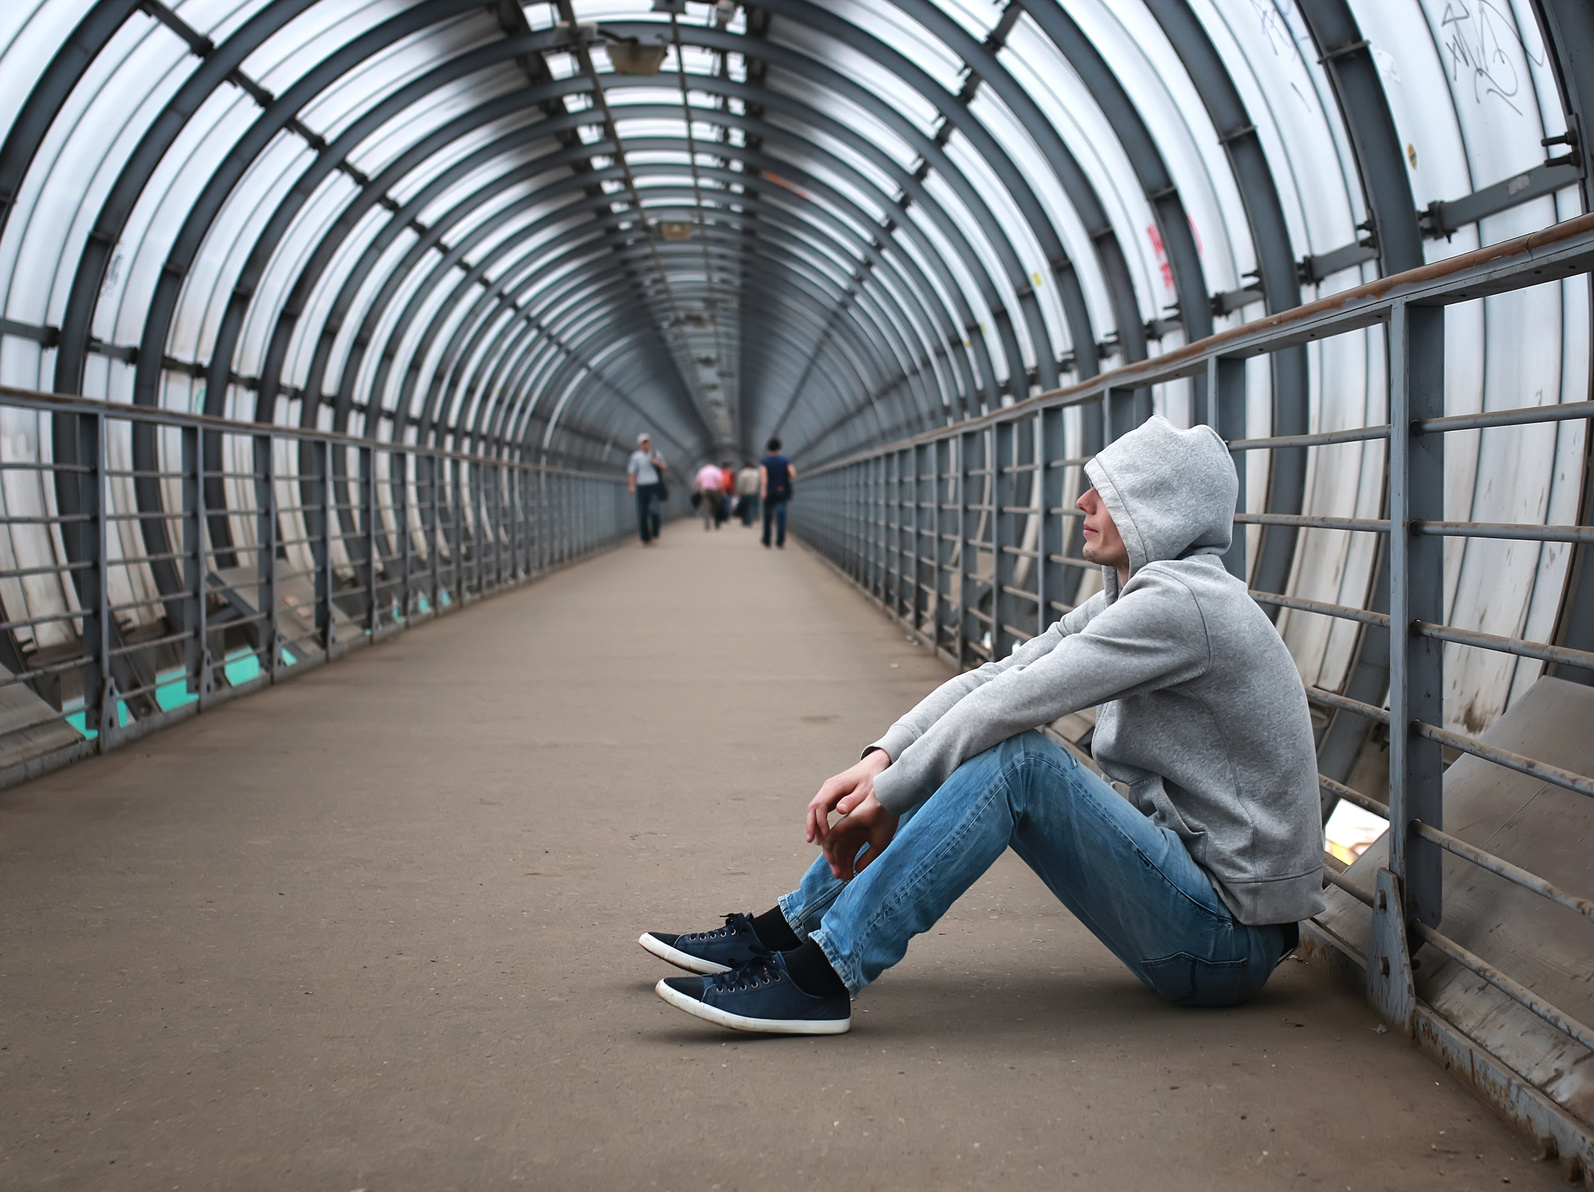 A man in a grey hoodie sits on the ground, waiting to deal drugs.